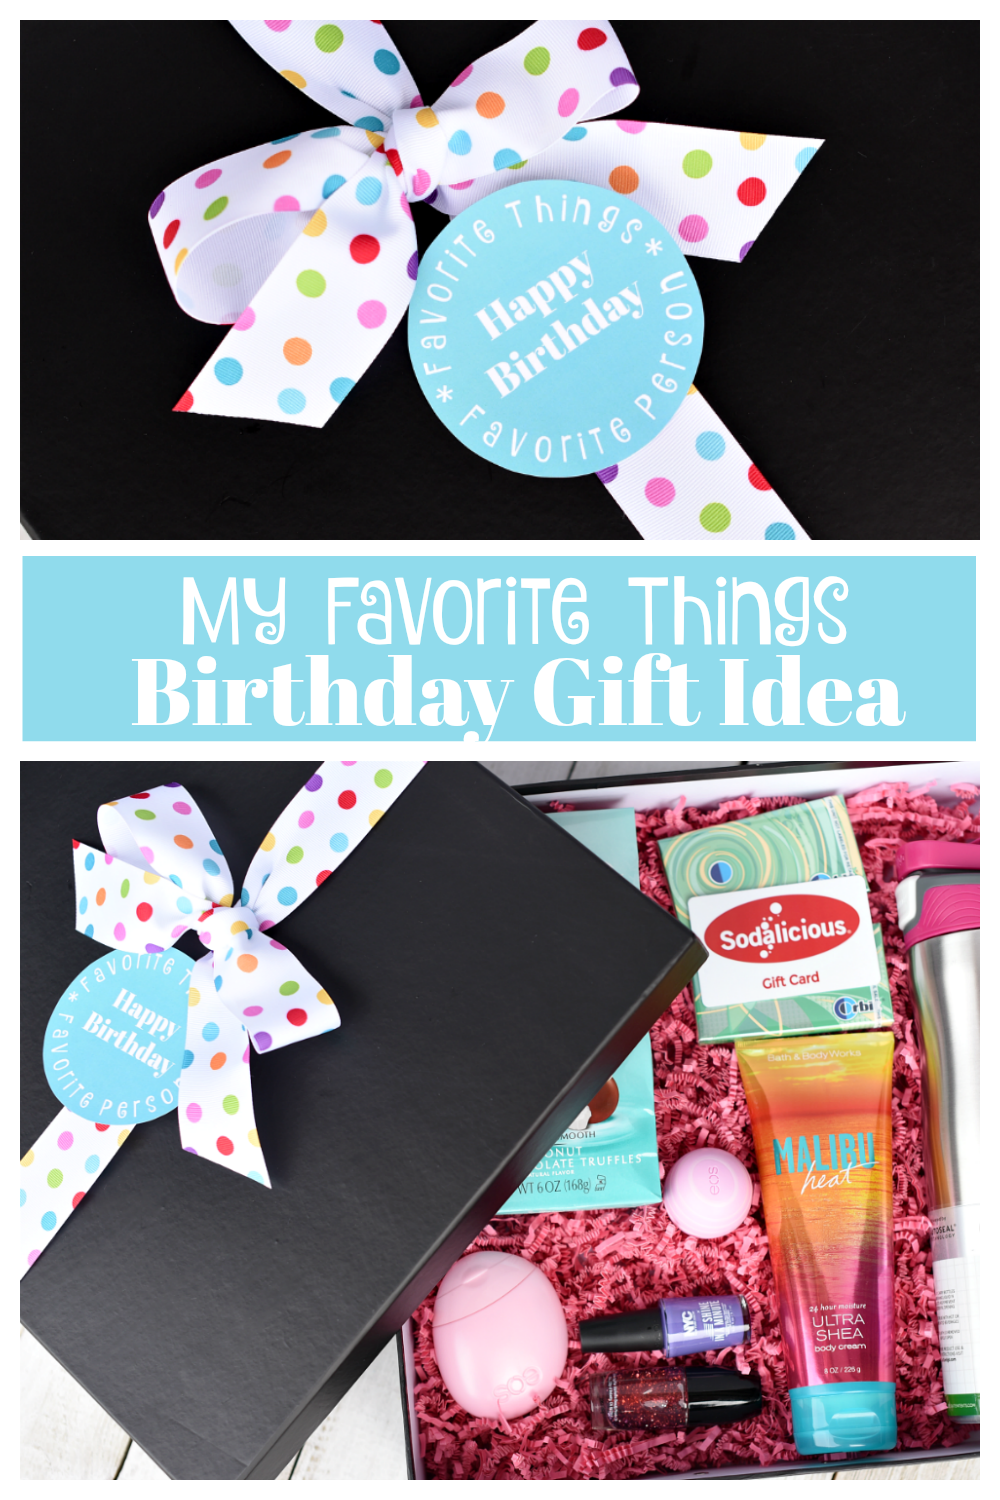 Birthday Gifts for Your Best Friends! This is a fun and creative way to wish your BFF a Happy Birthday-give your favorite person some of your favorite things. Fun, simple, creative gift idea. #fun-squaredgifts #birthdaygifts #bestfriendgifts #bestfriendbirthdaygifts